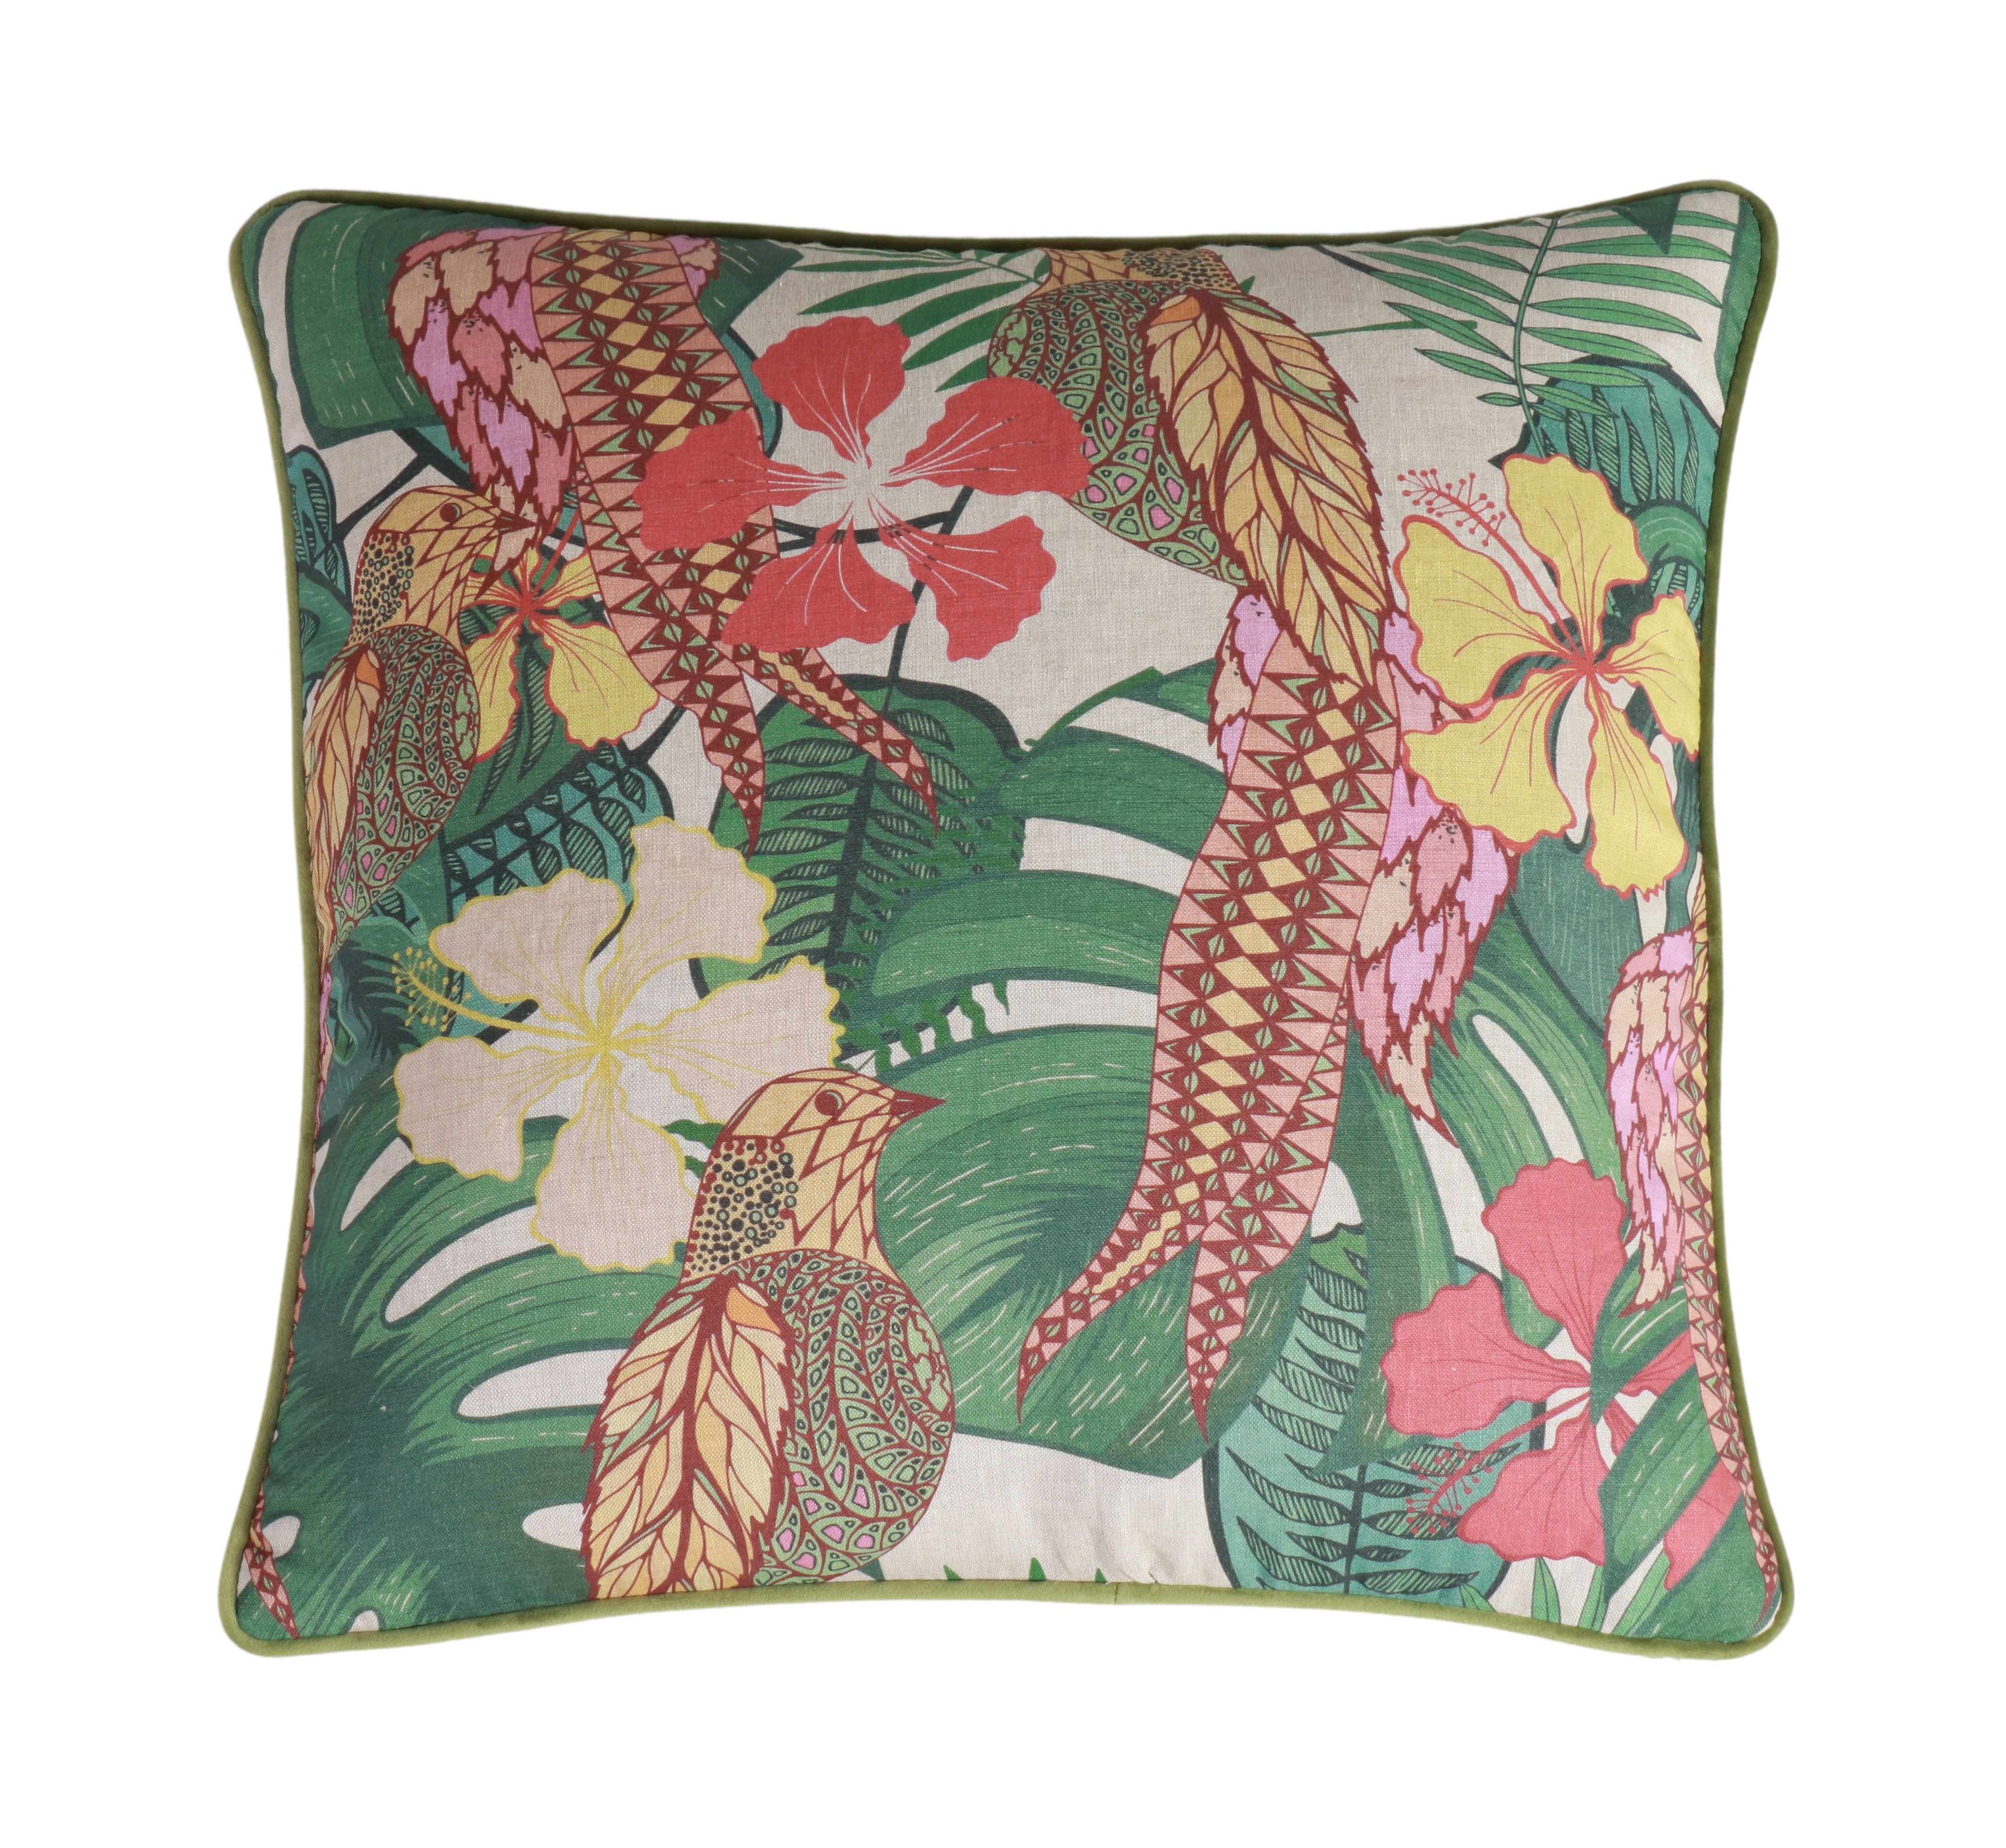 floral scatter cushion with velvet backing.